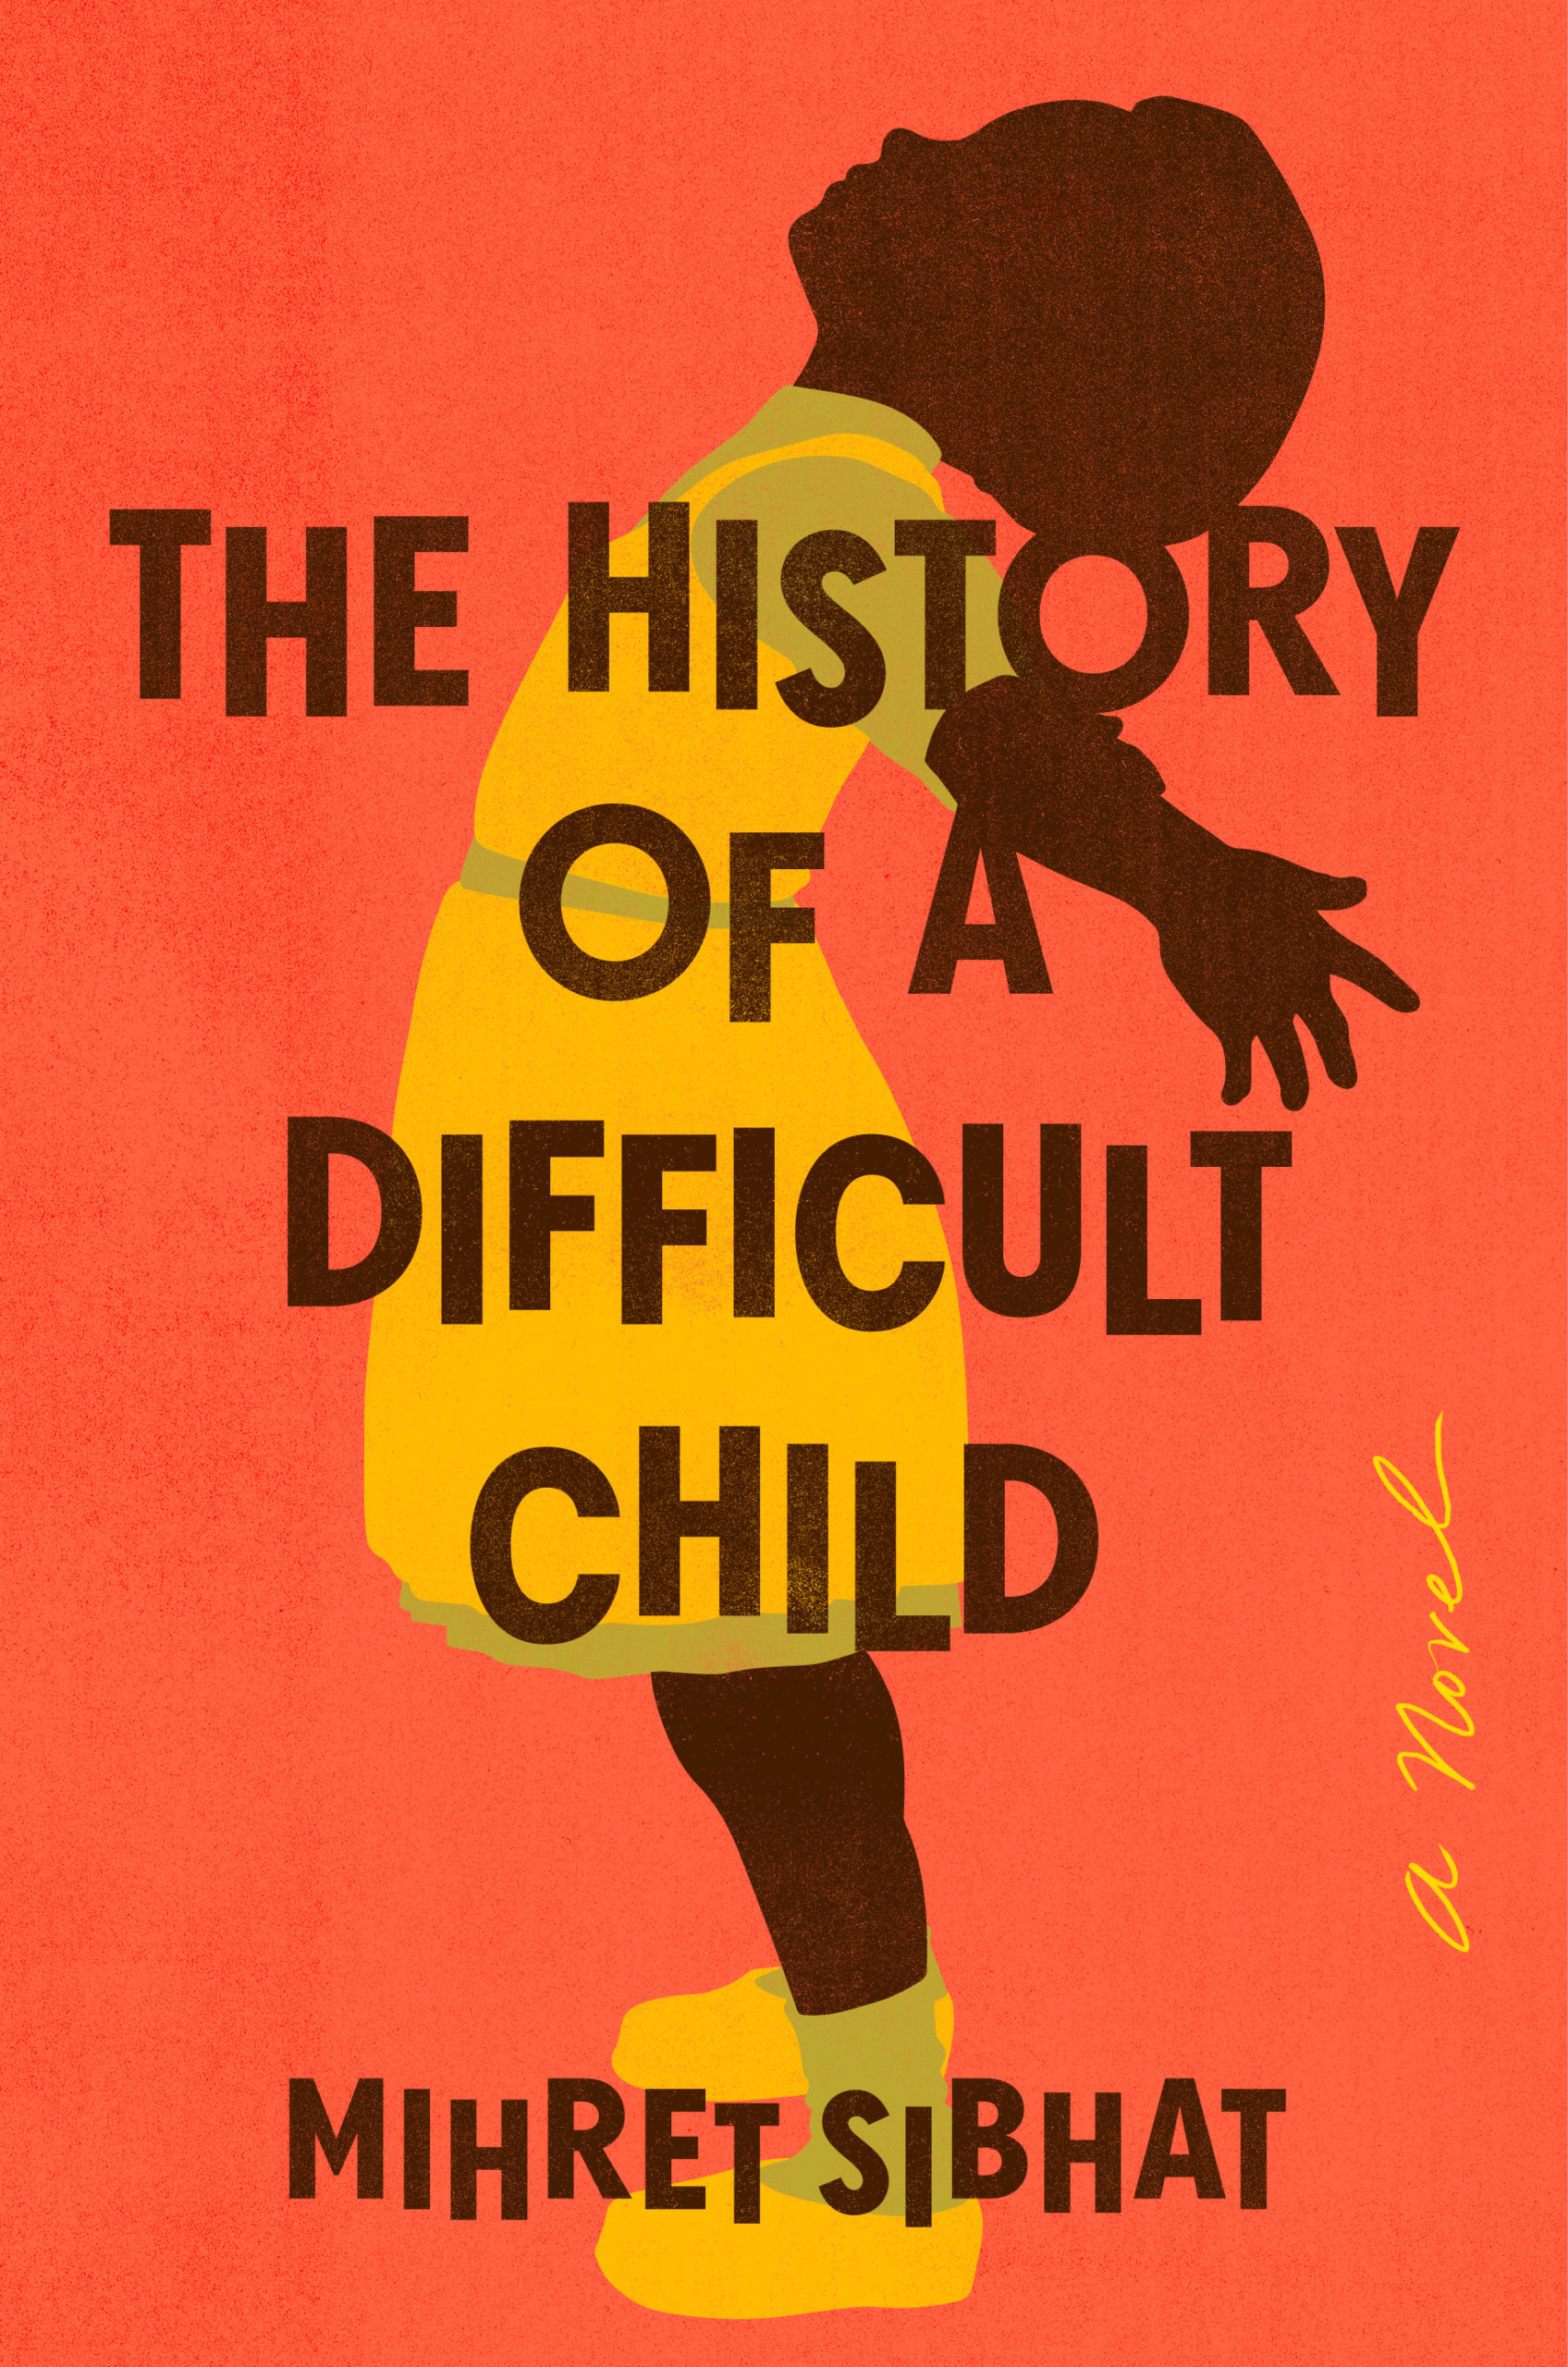 THE HISTORY OF A DIFFICULT CHILD